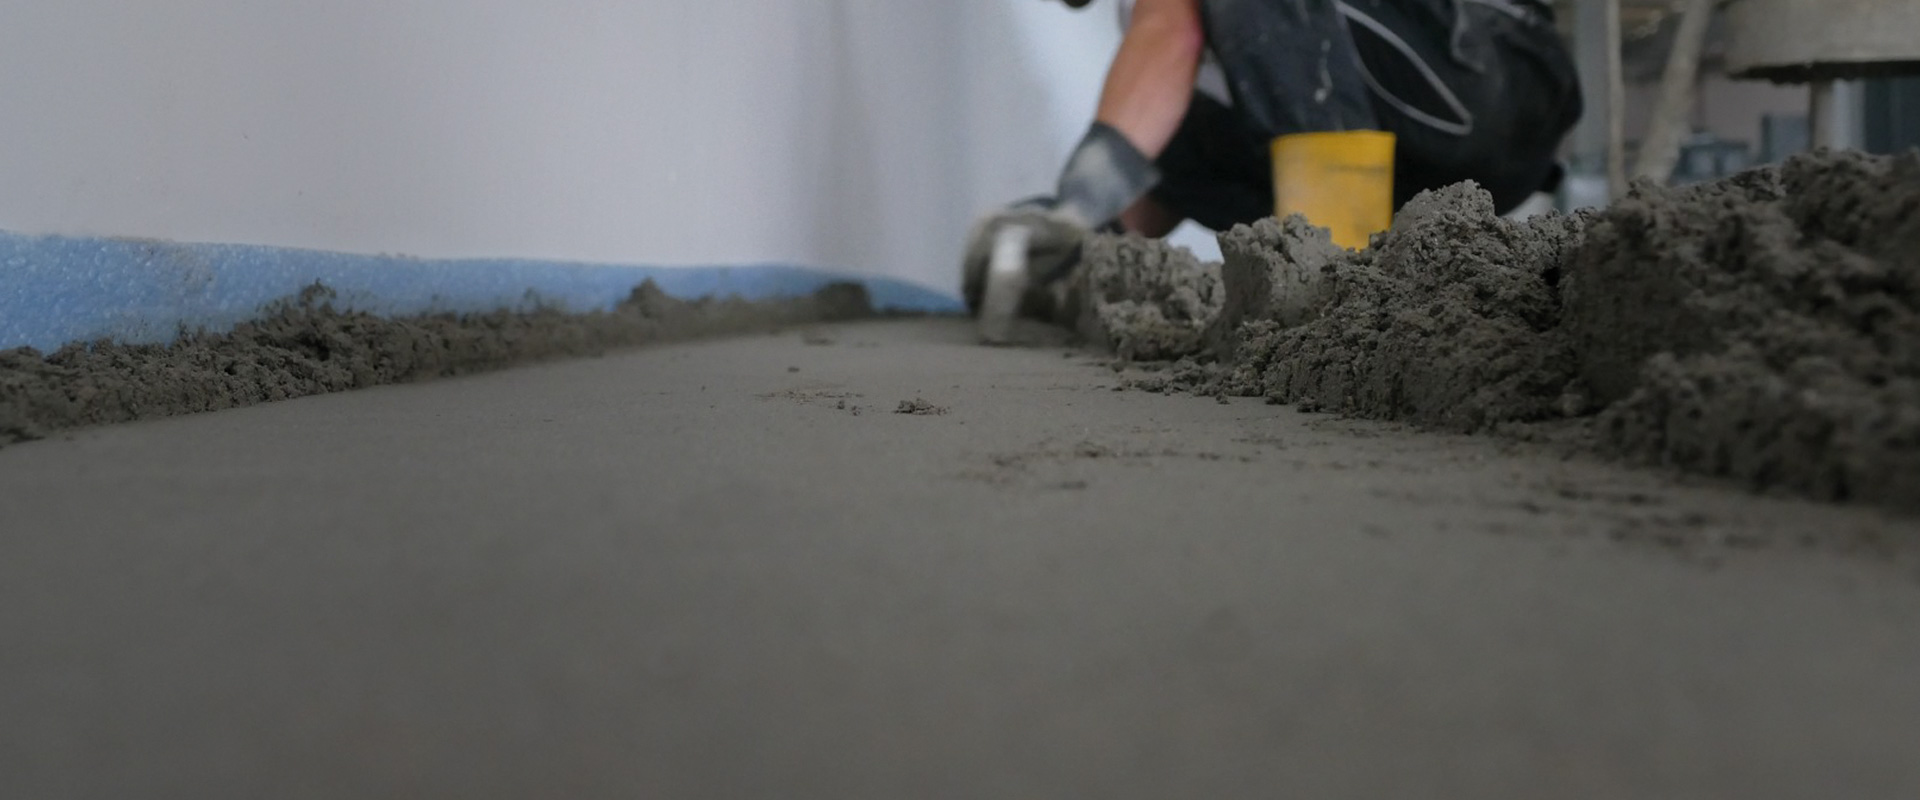 Thanks to Powerscreed rapid, the screed replacement work at the FitX studio in Berlin met all the top performance criteria specified.